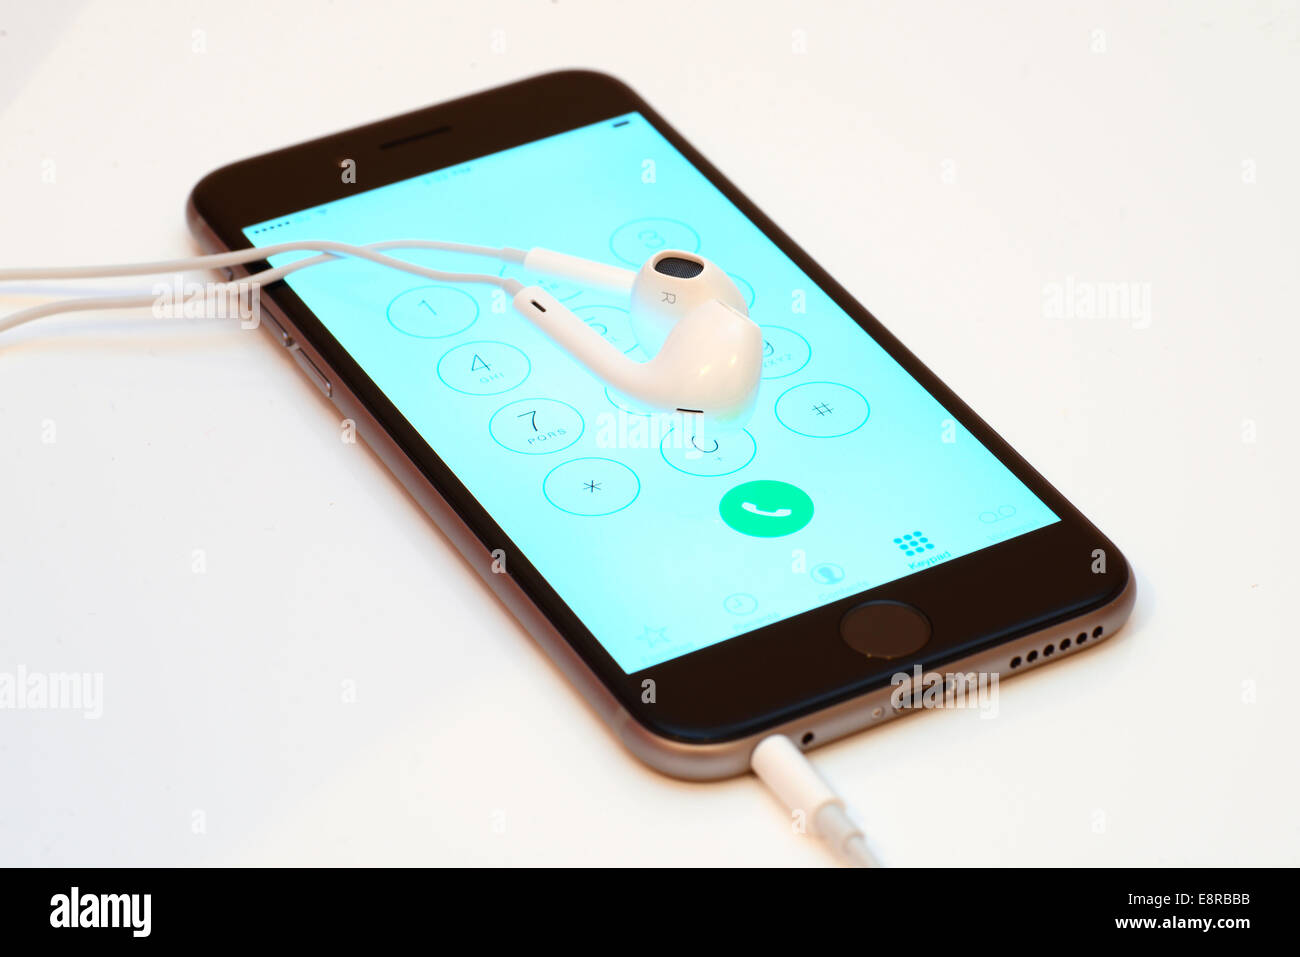 Apple iPhone 6 on white background with earbuds and phone application open Stock Photo